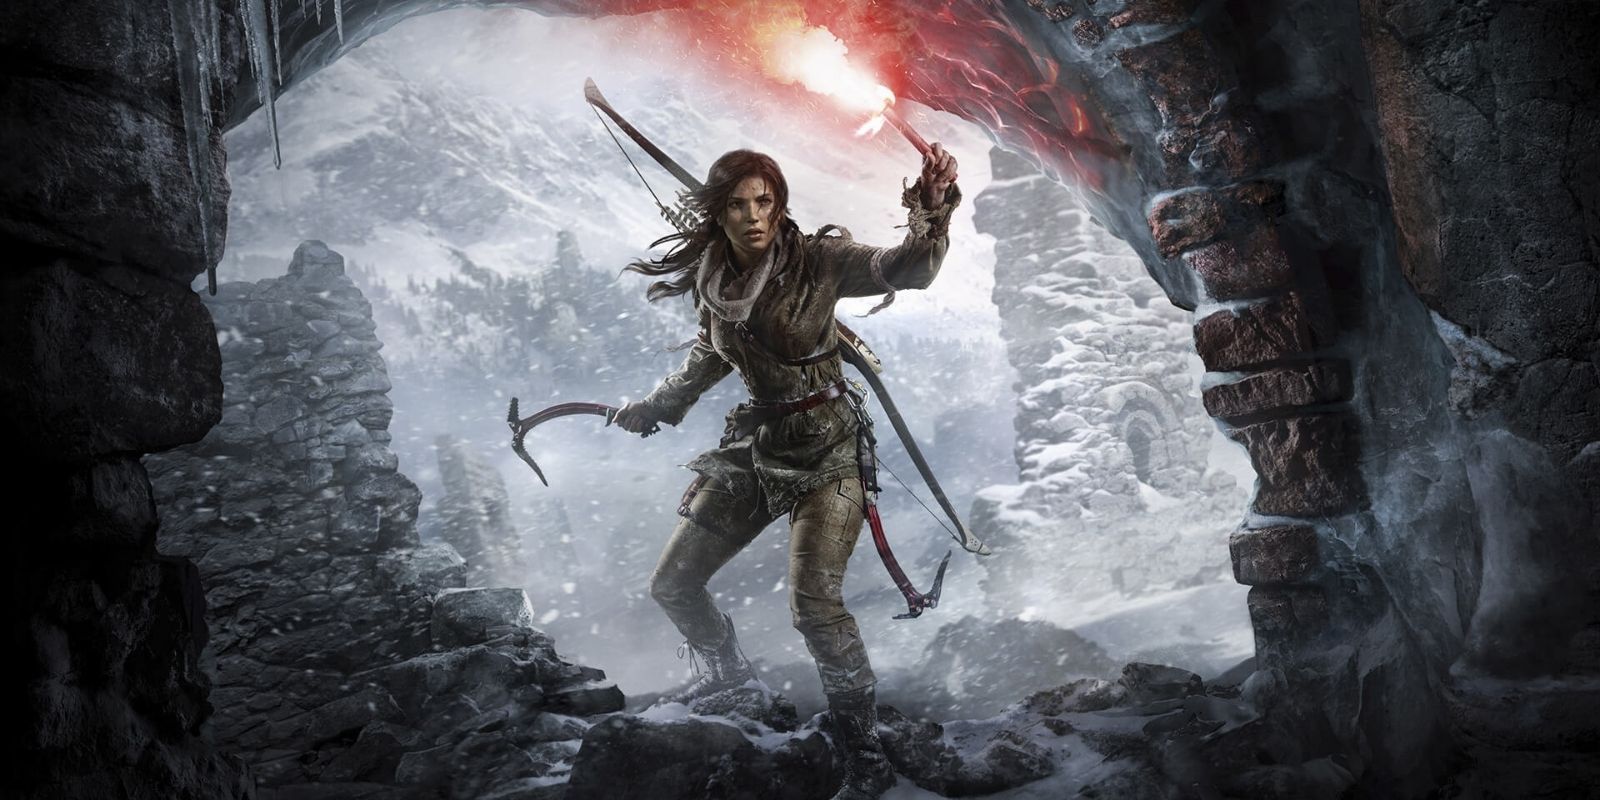 The key art for Rise of the Tomb Raider, featuring Lara Croft standing in a cave